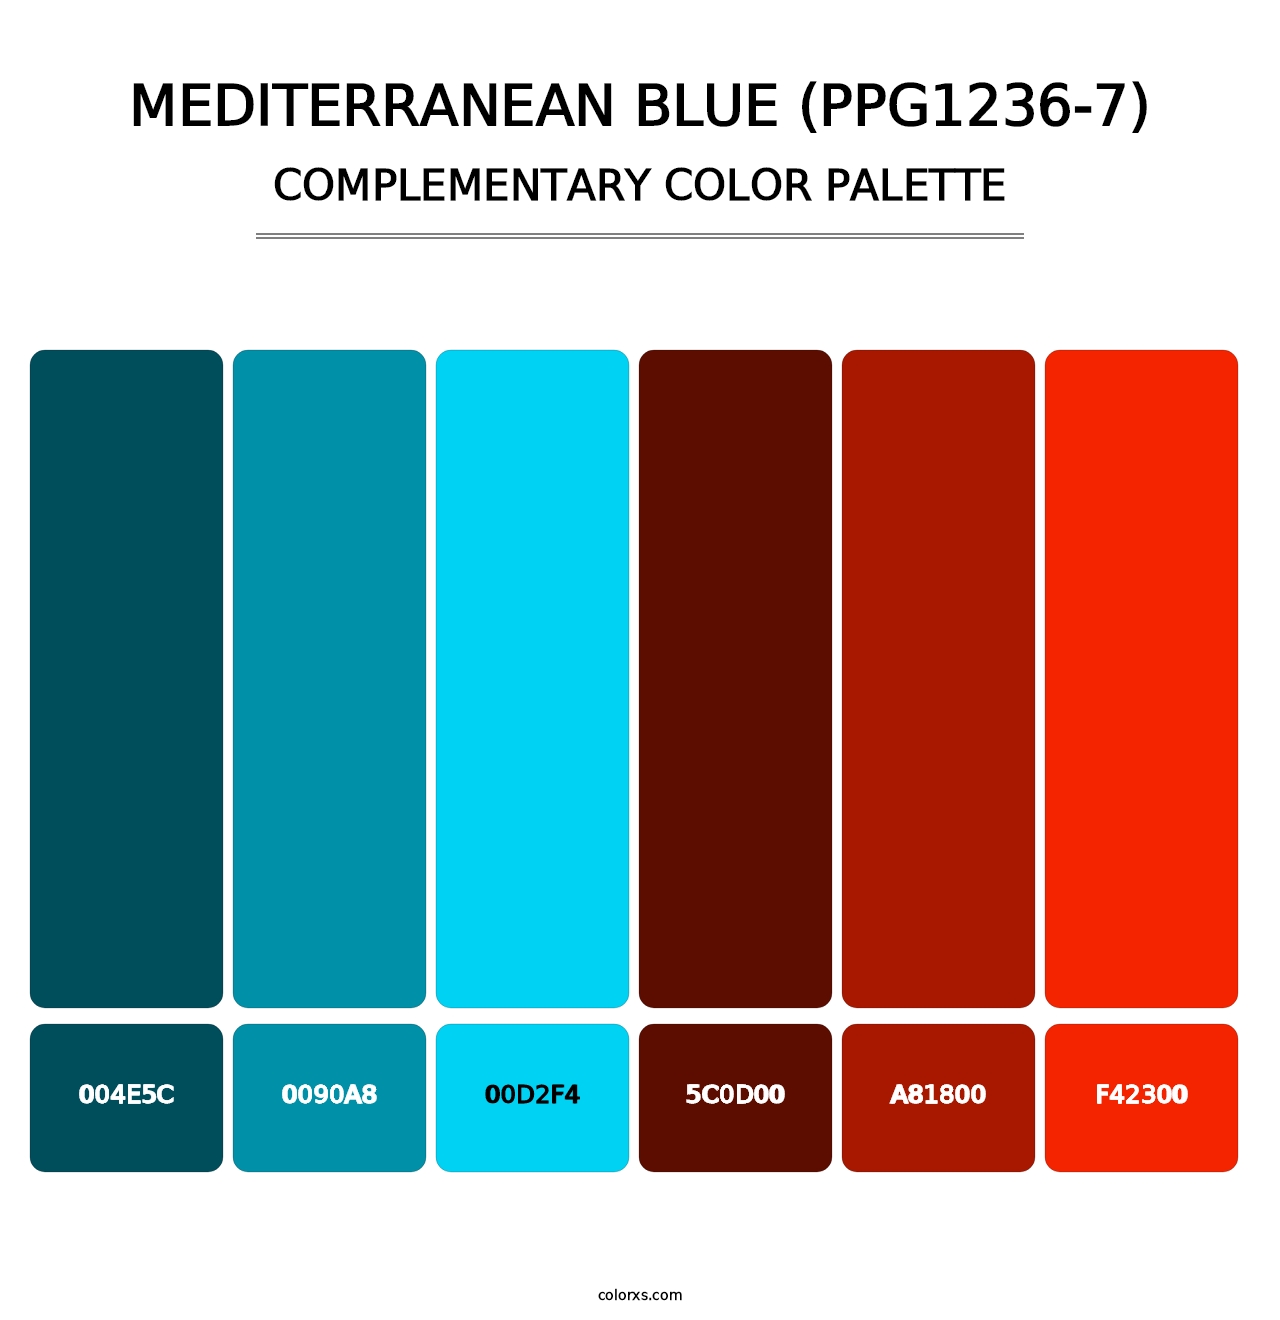 Mediterranean Blue (PPG1236-7) - Complementary Color Palette